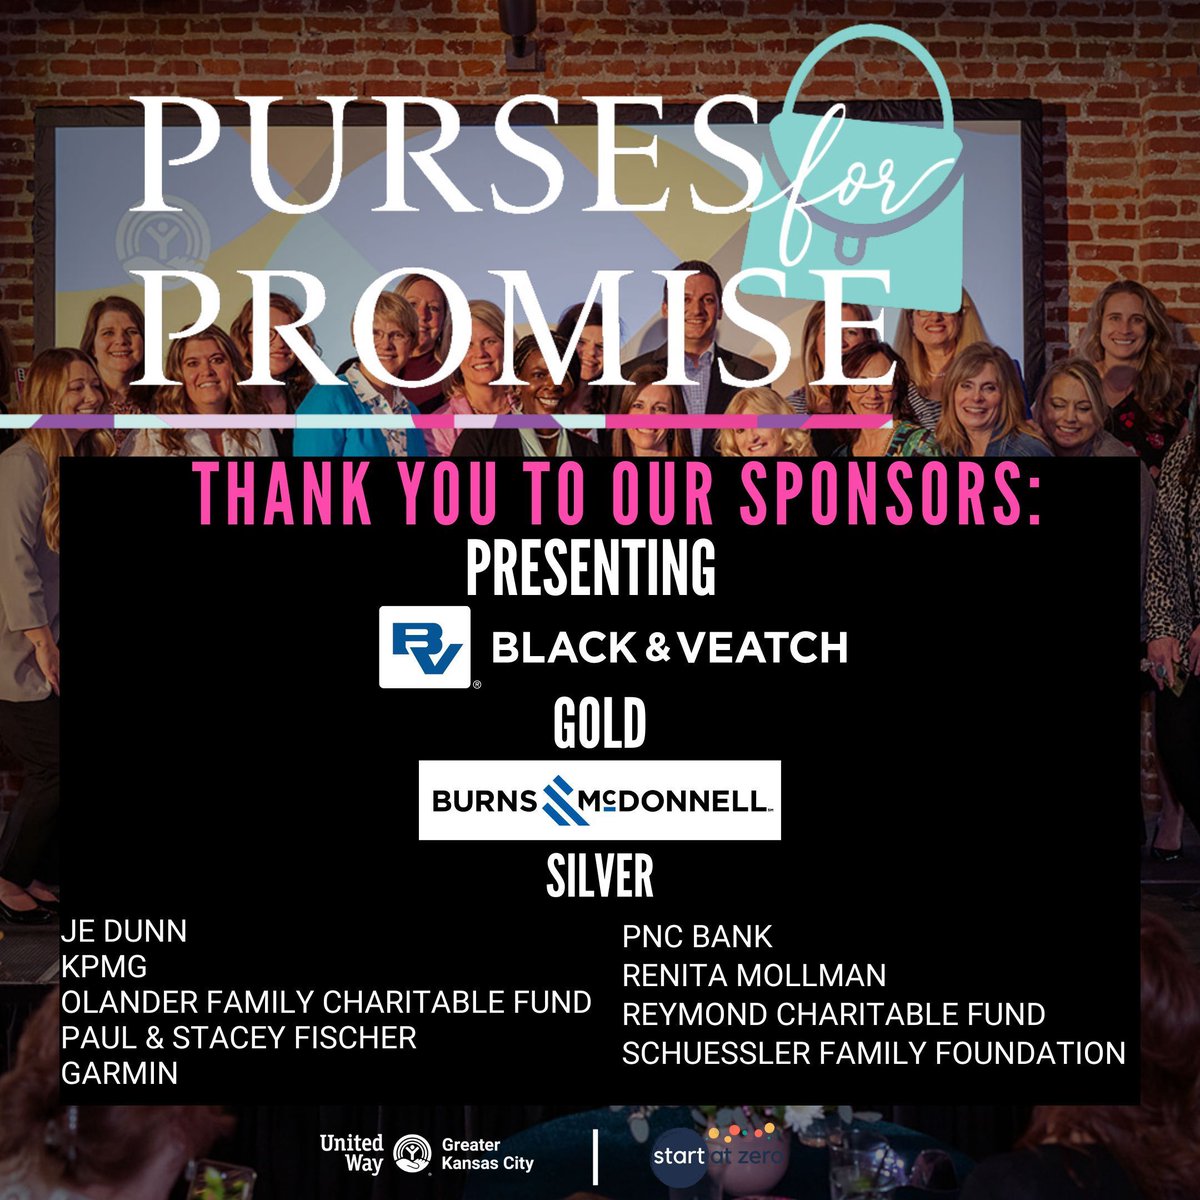 Thank you to our Purses for Pomise sponsors: 🏅Presenting @Black_Veatch; 🥇Gold: @BurnsMcDonnell; 🥈Silver: @JEDunn @KPMG @Garmin @PNCBank Olander Family Charitable Fund, Paul & Stacey Fischer, Renita Mollman, Reymond Charitable Fund & Schuessler Family Foundation!